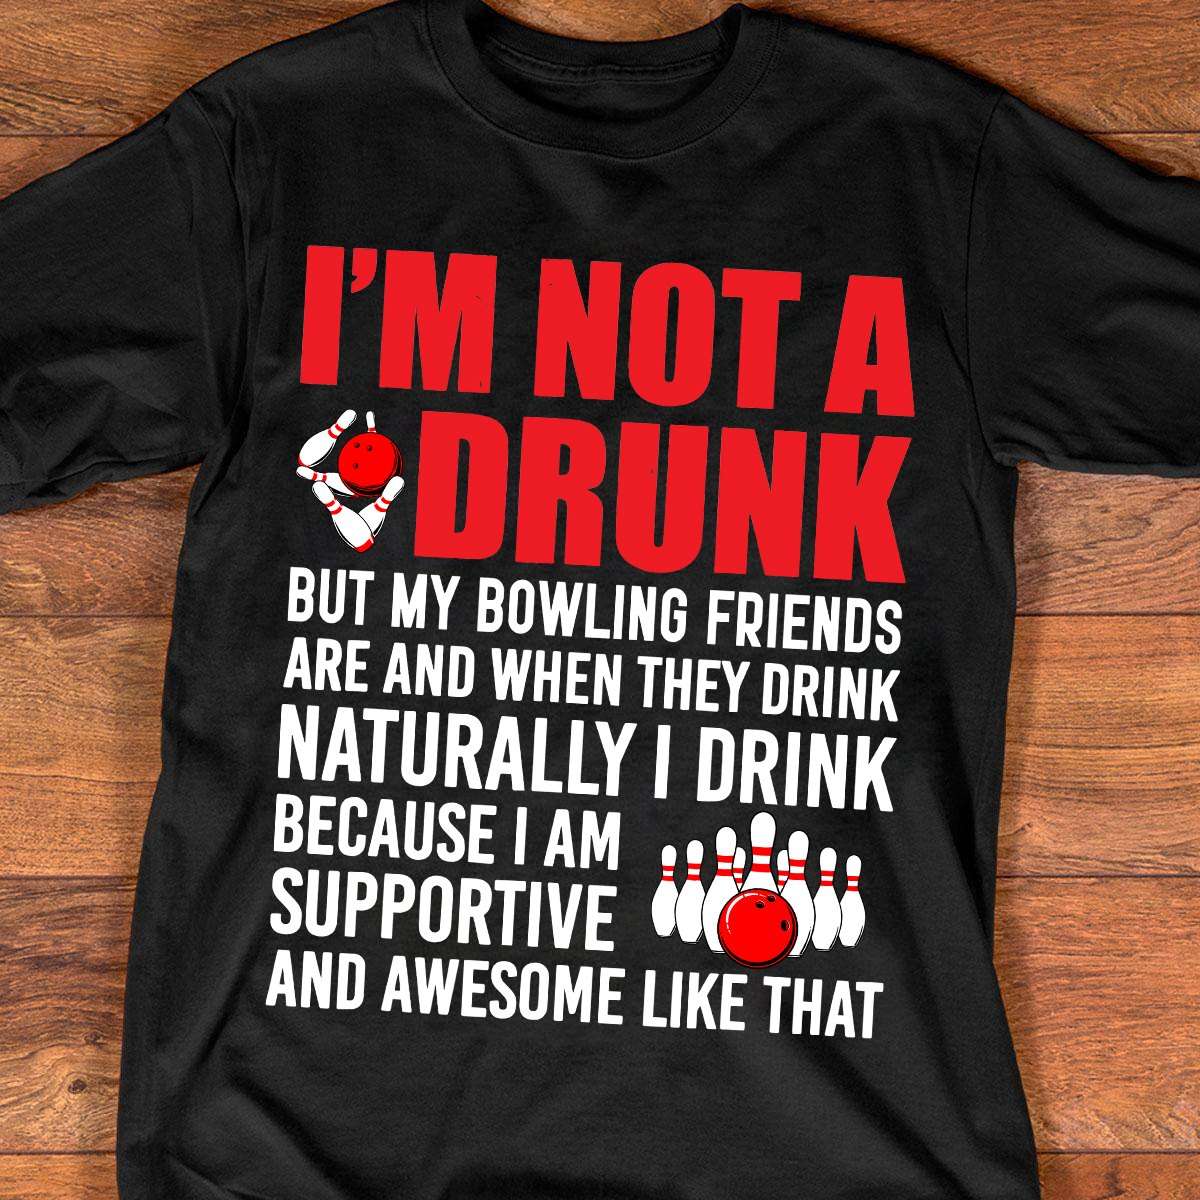 I'm not a drunk but my bowling friends are and when they drink naturally I drink - Drinking and playing bowling